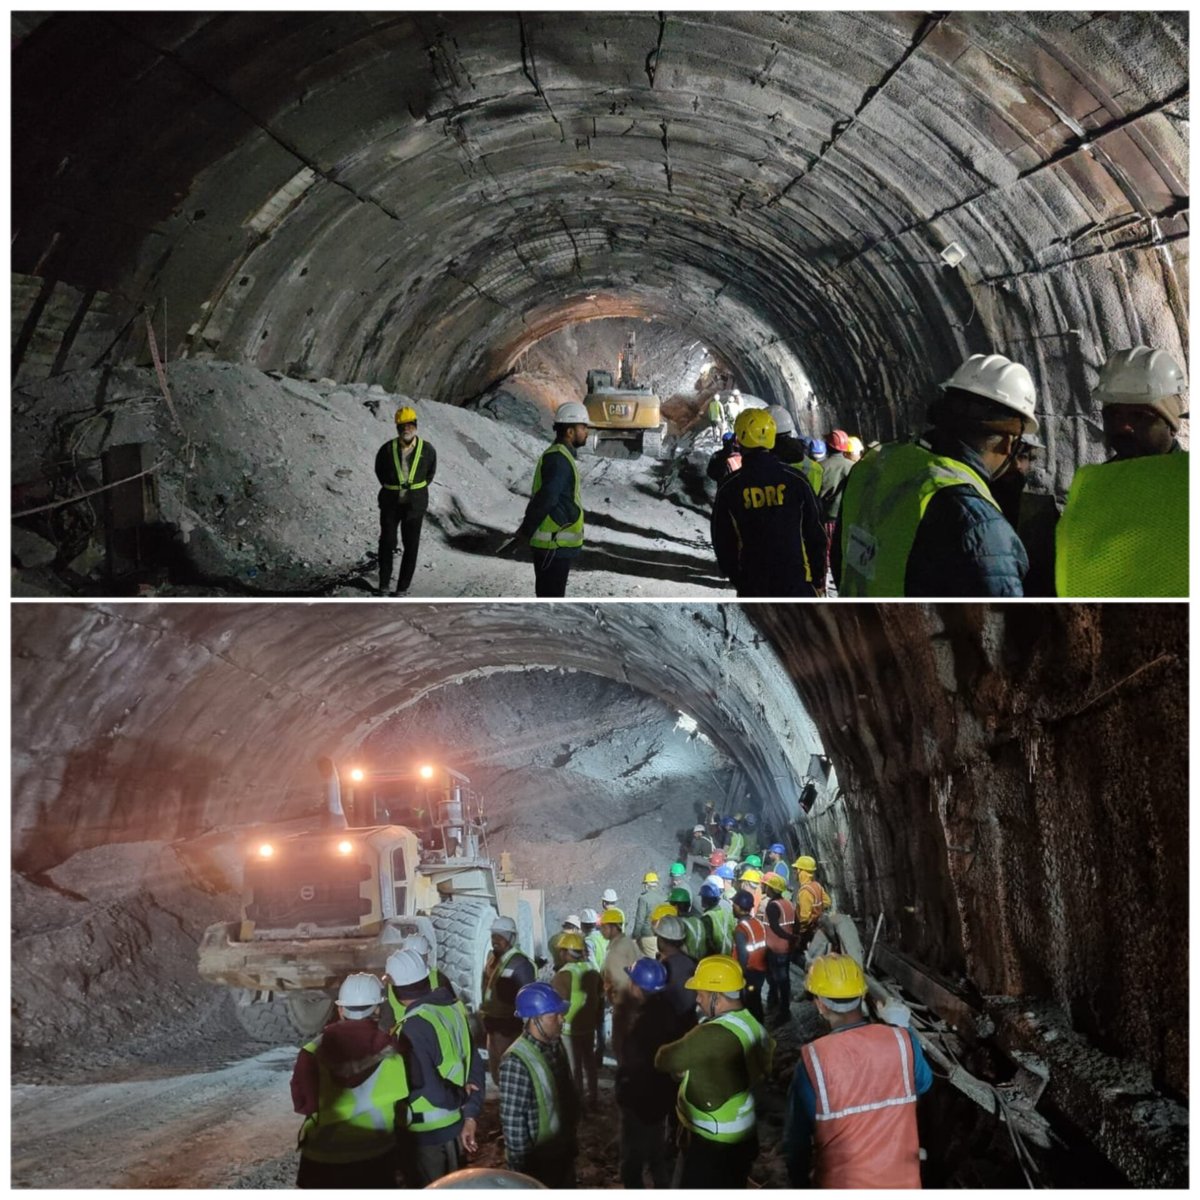 #Uttarakhand turns to global support as #Norway and #Thailand rescue teams join efforts to save 40 trapped laborers in the #tunnel; Indian Air Force aids with heavy equipment transport.

Read more details on shorts91.com/category/india

 #UttarakhandRescue #InternationalAid